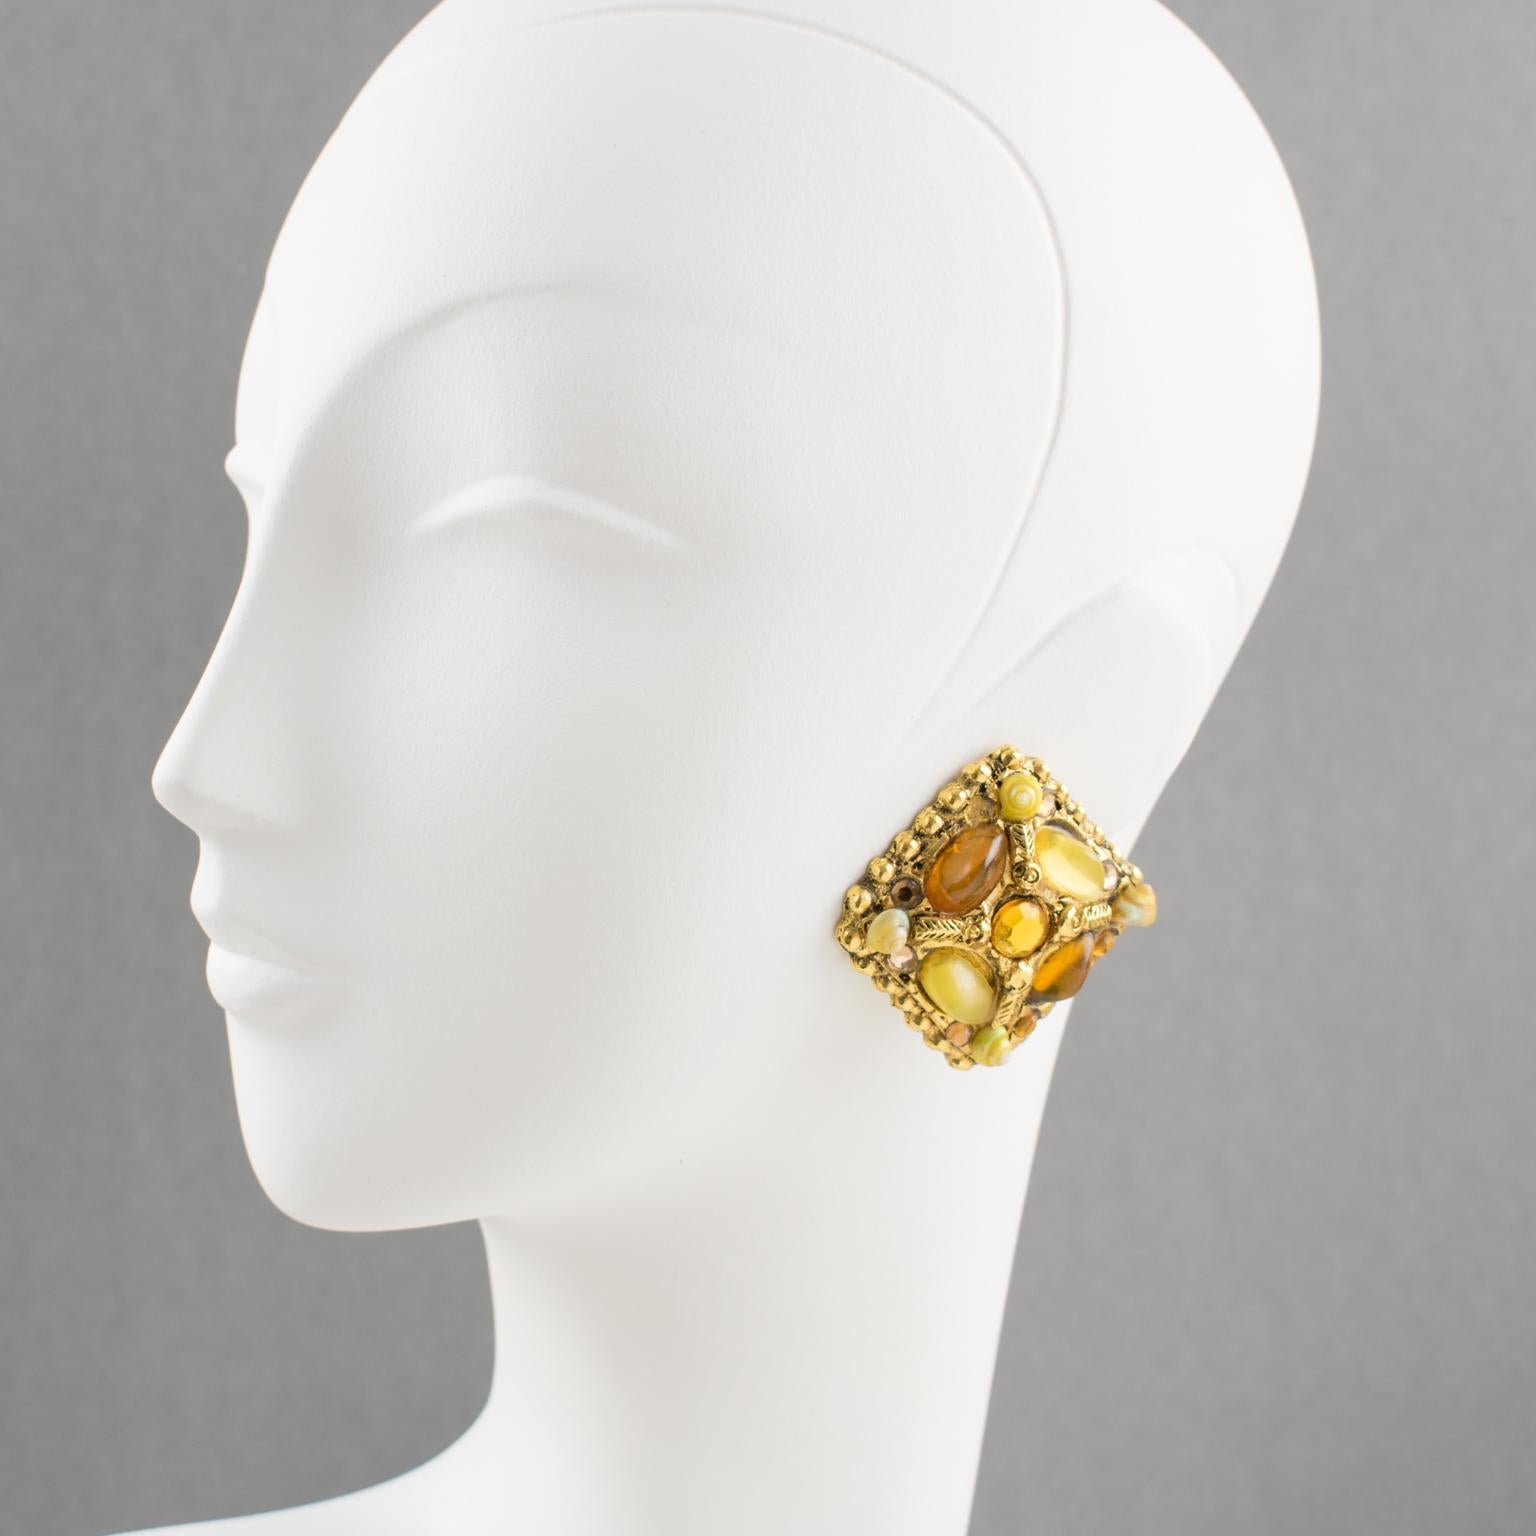 Very attractive Kalinger Paris clip-on earrings. Oversized gilt metal-coated resin with a geometric shape all carved and textured topped with real tiny seashells, sunny resin cabochons, and glass rhinestone. Assorted colors of milky lemon, yellow